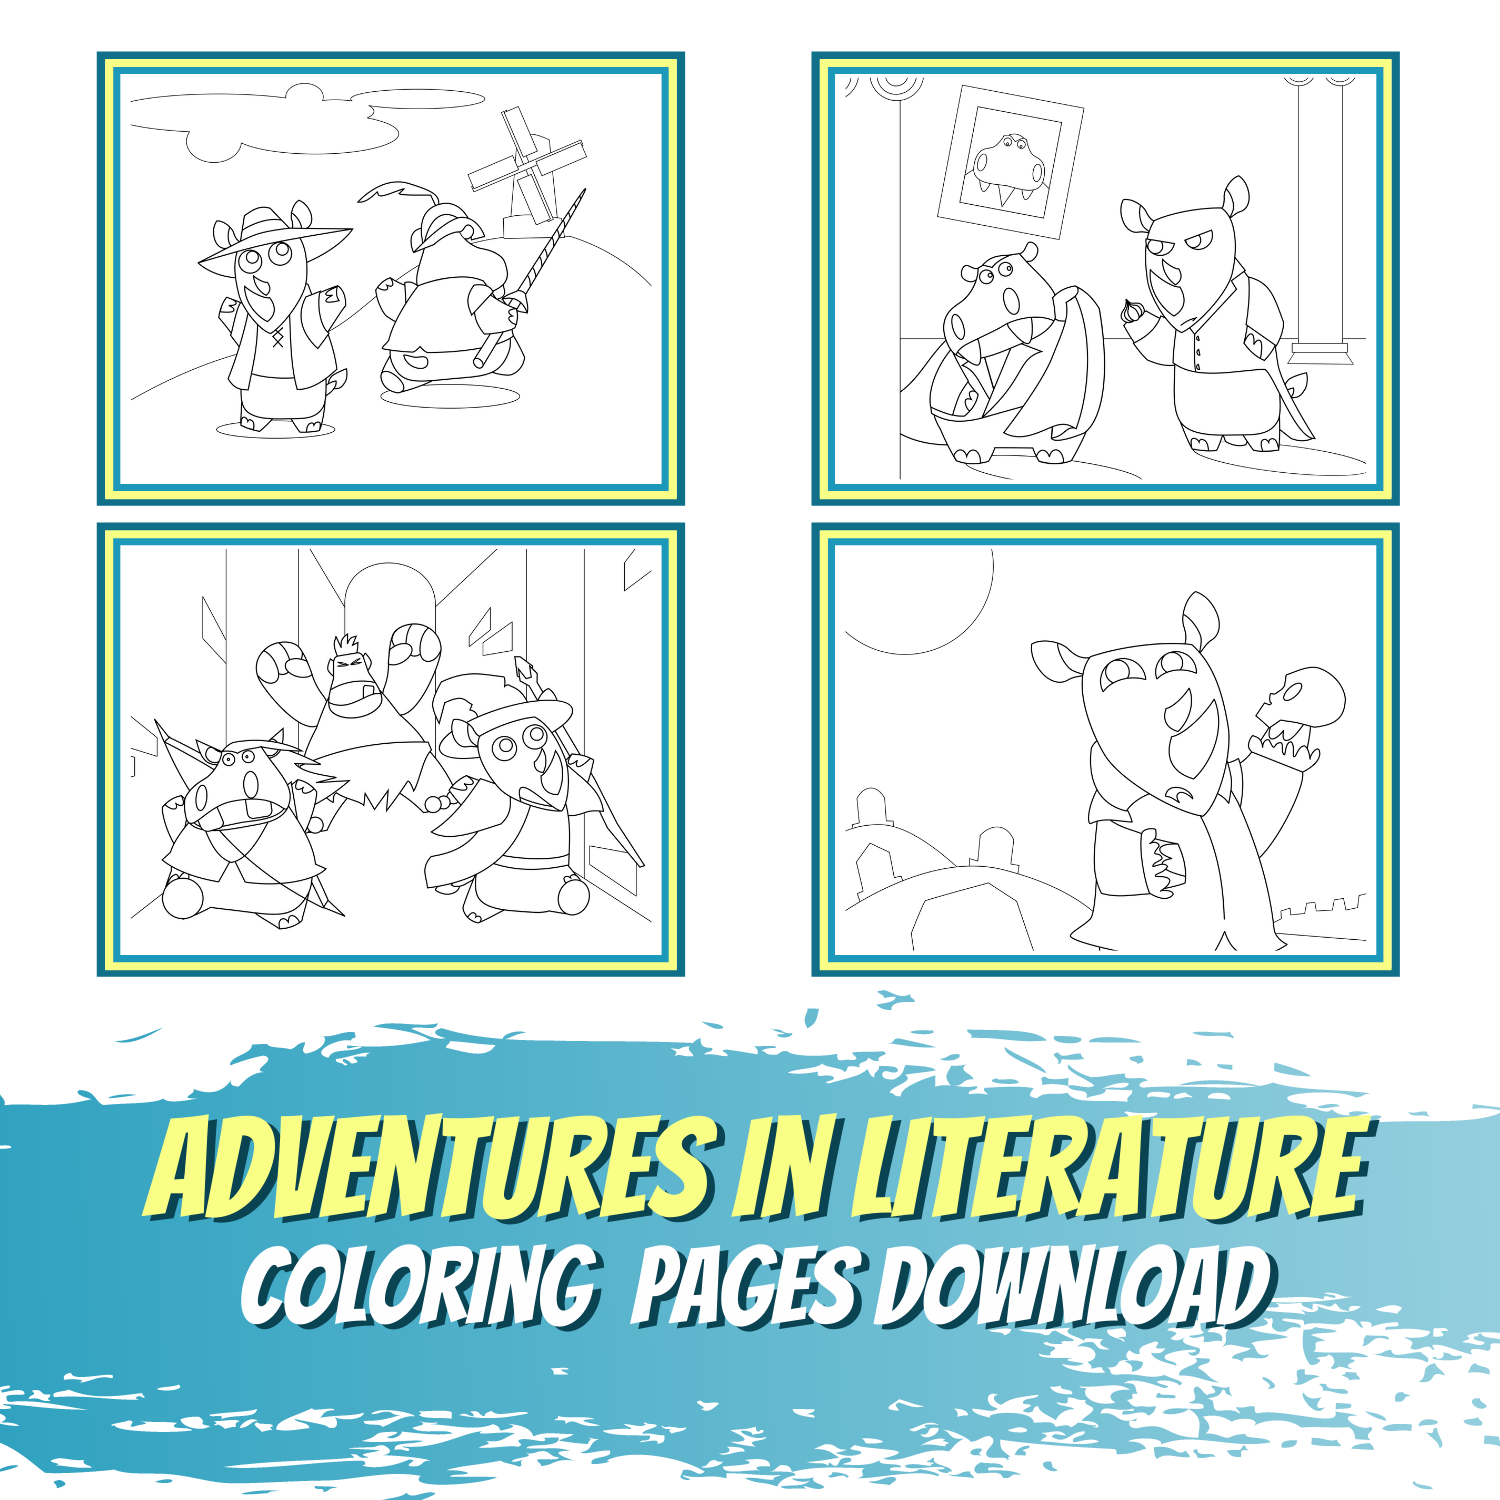 Adventures in Literature Coloring Pages